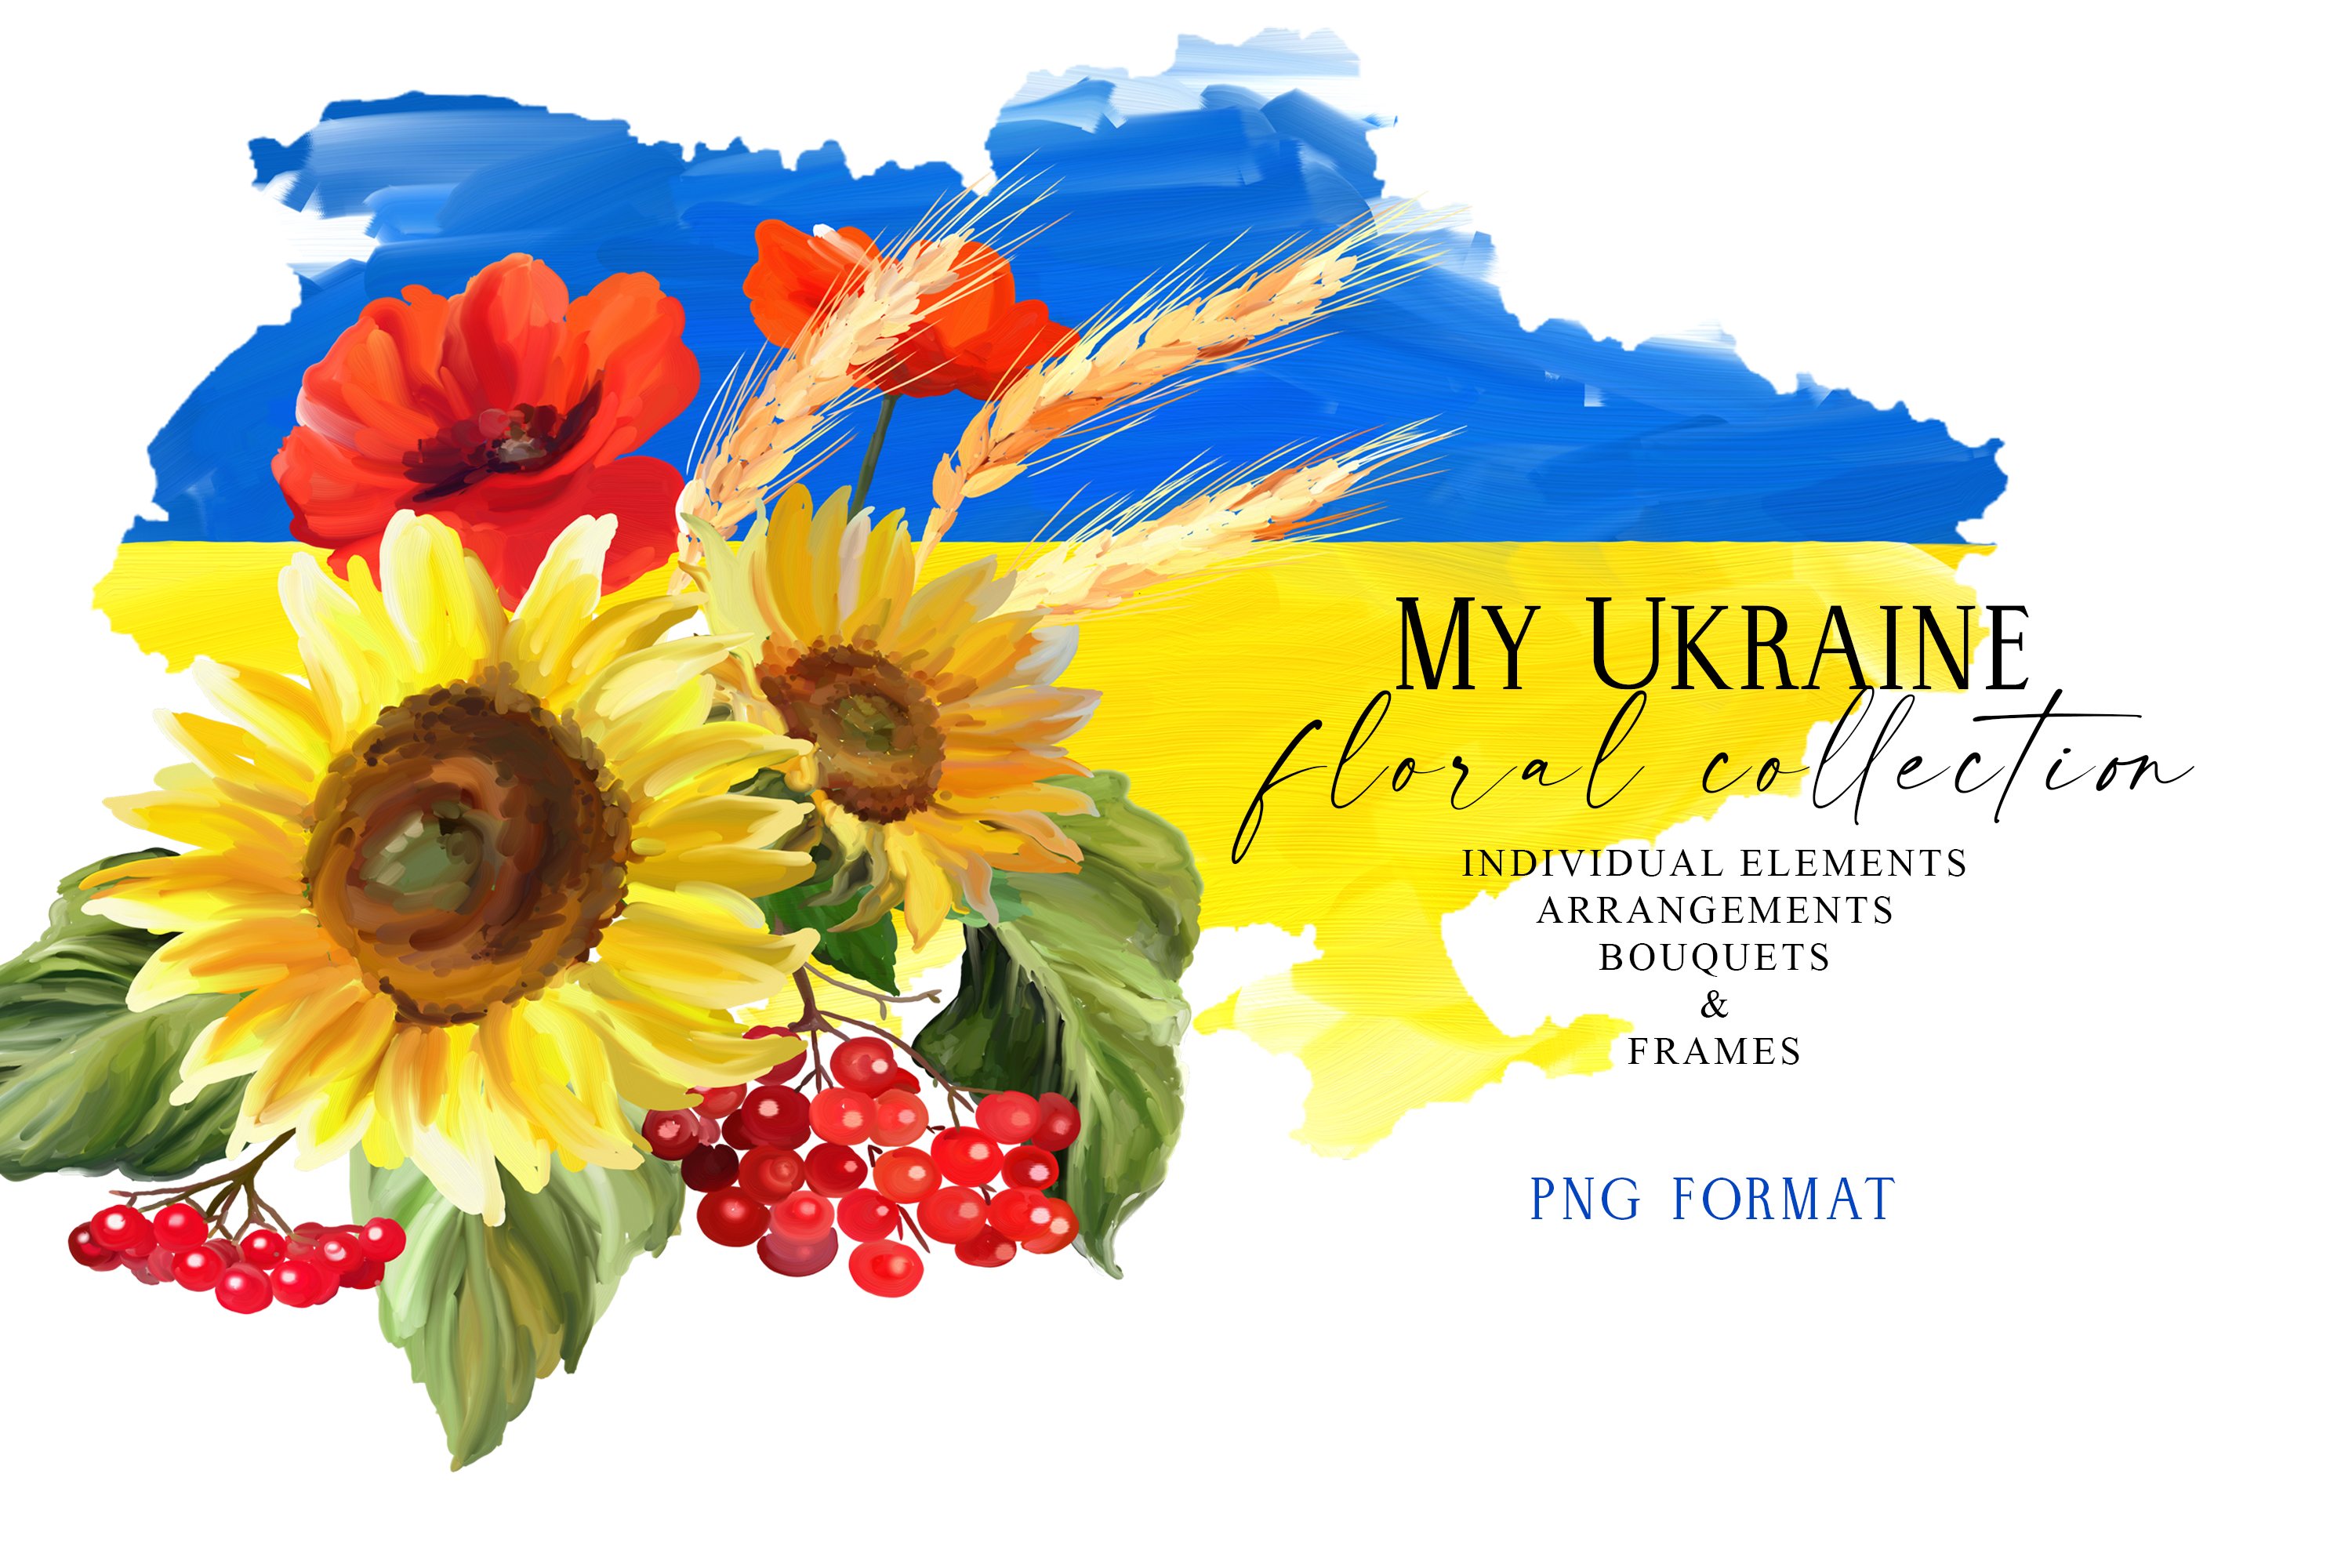 My Ukraine - floral collection cover image.